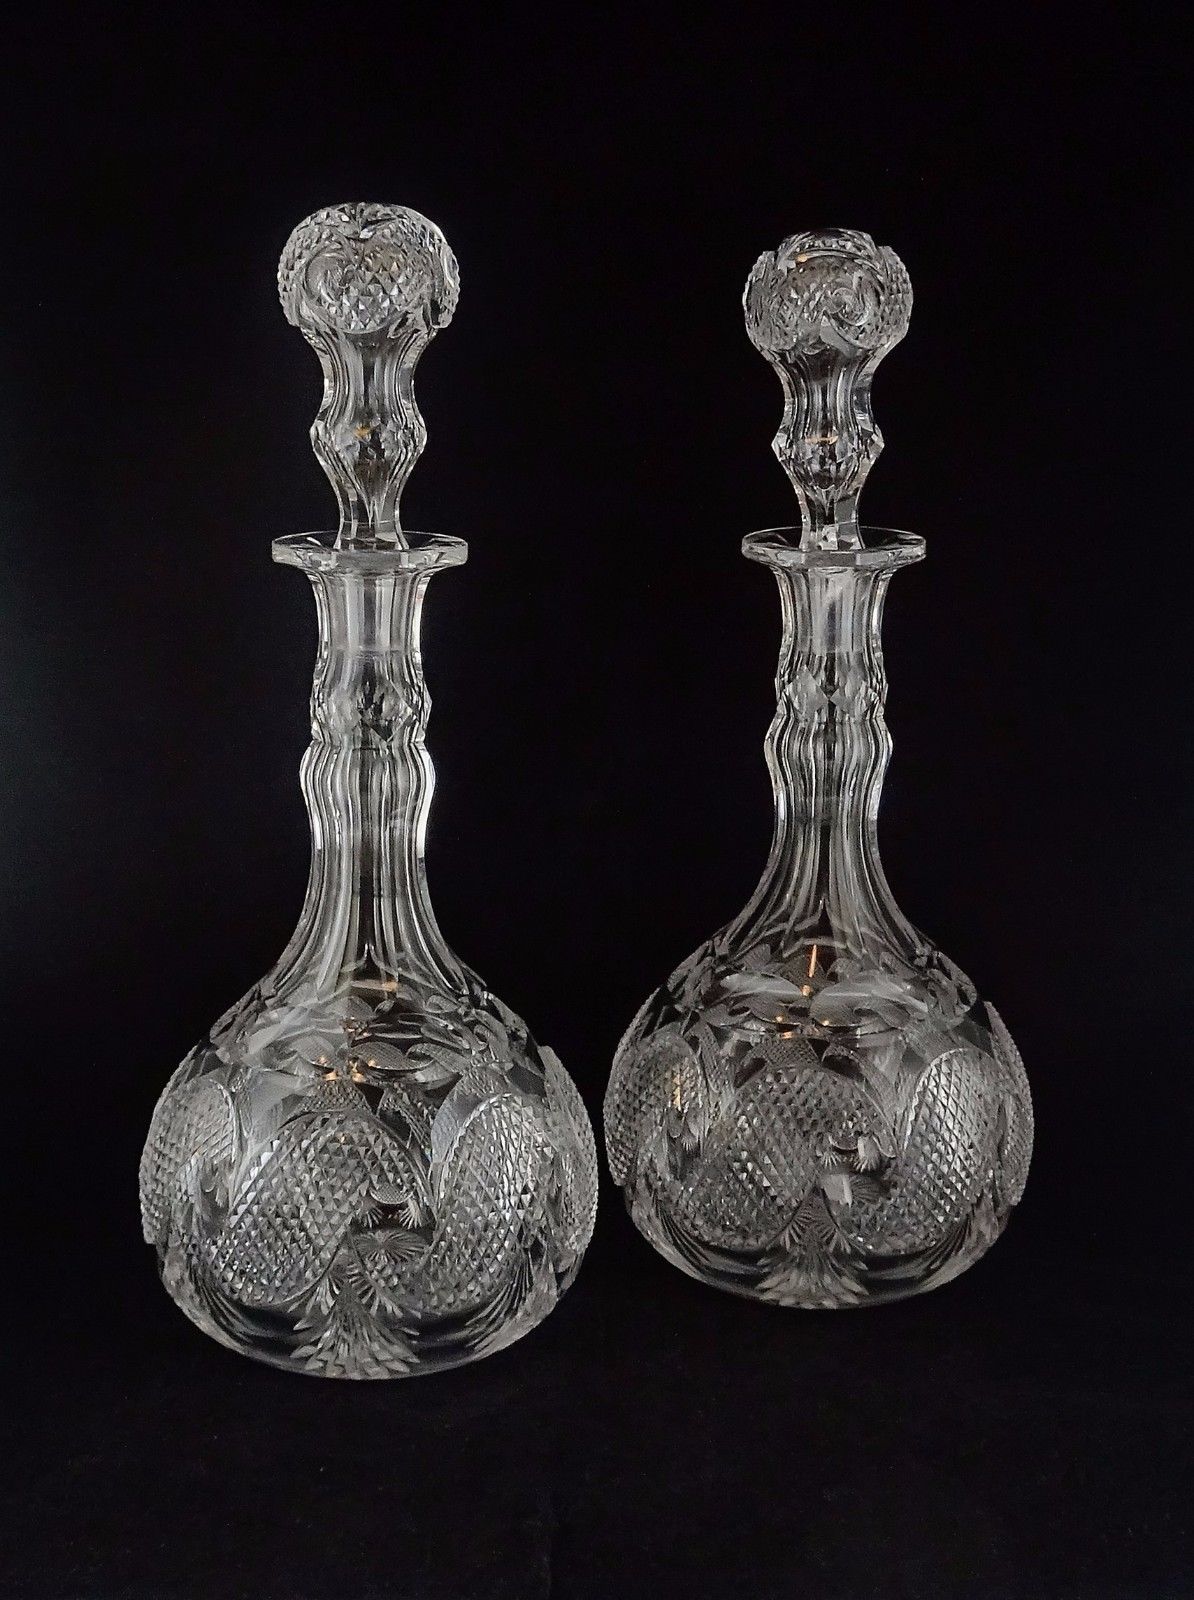 Pair (2) of Antique Crystal Glass Decanters w/Stoppers - Comet Swirl